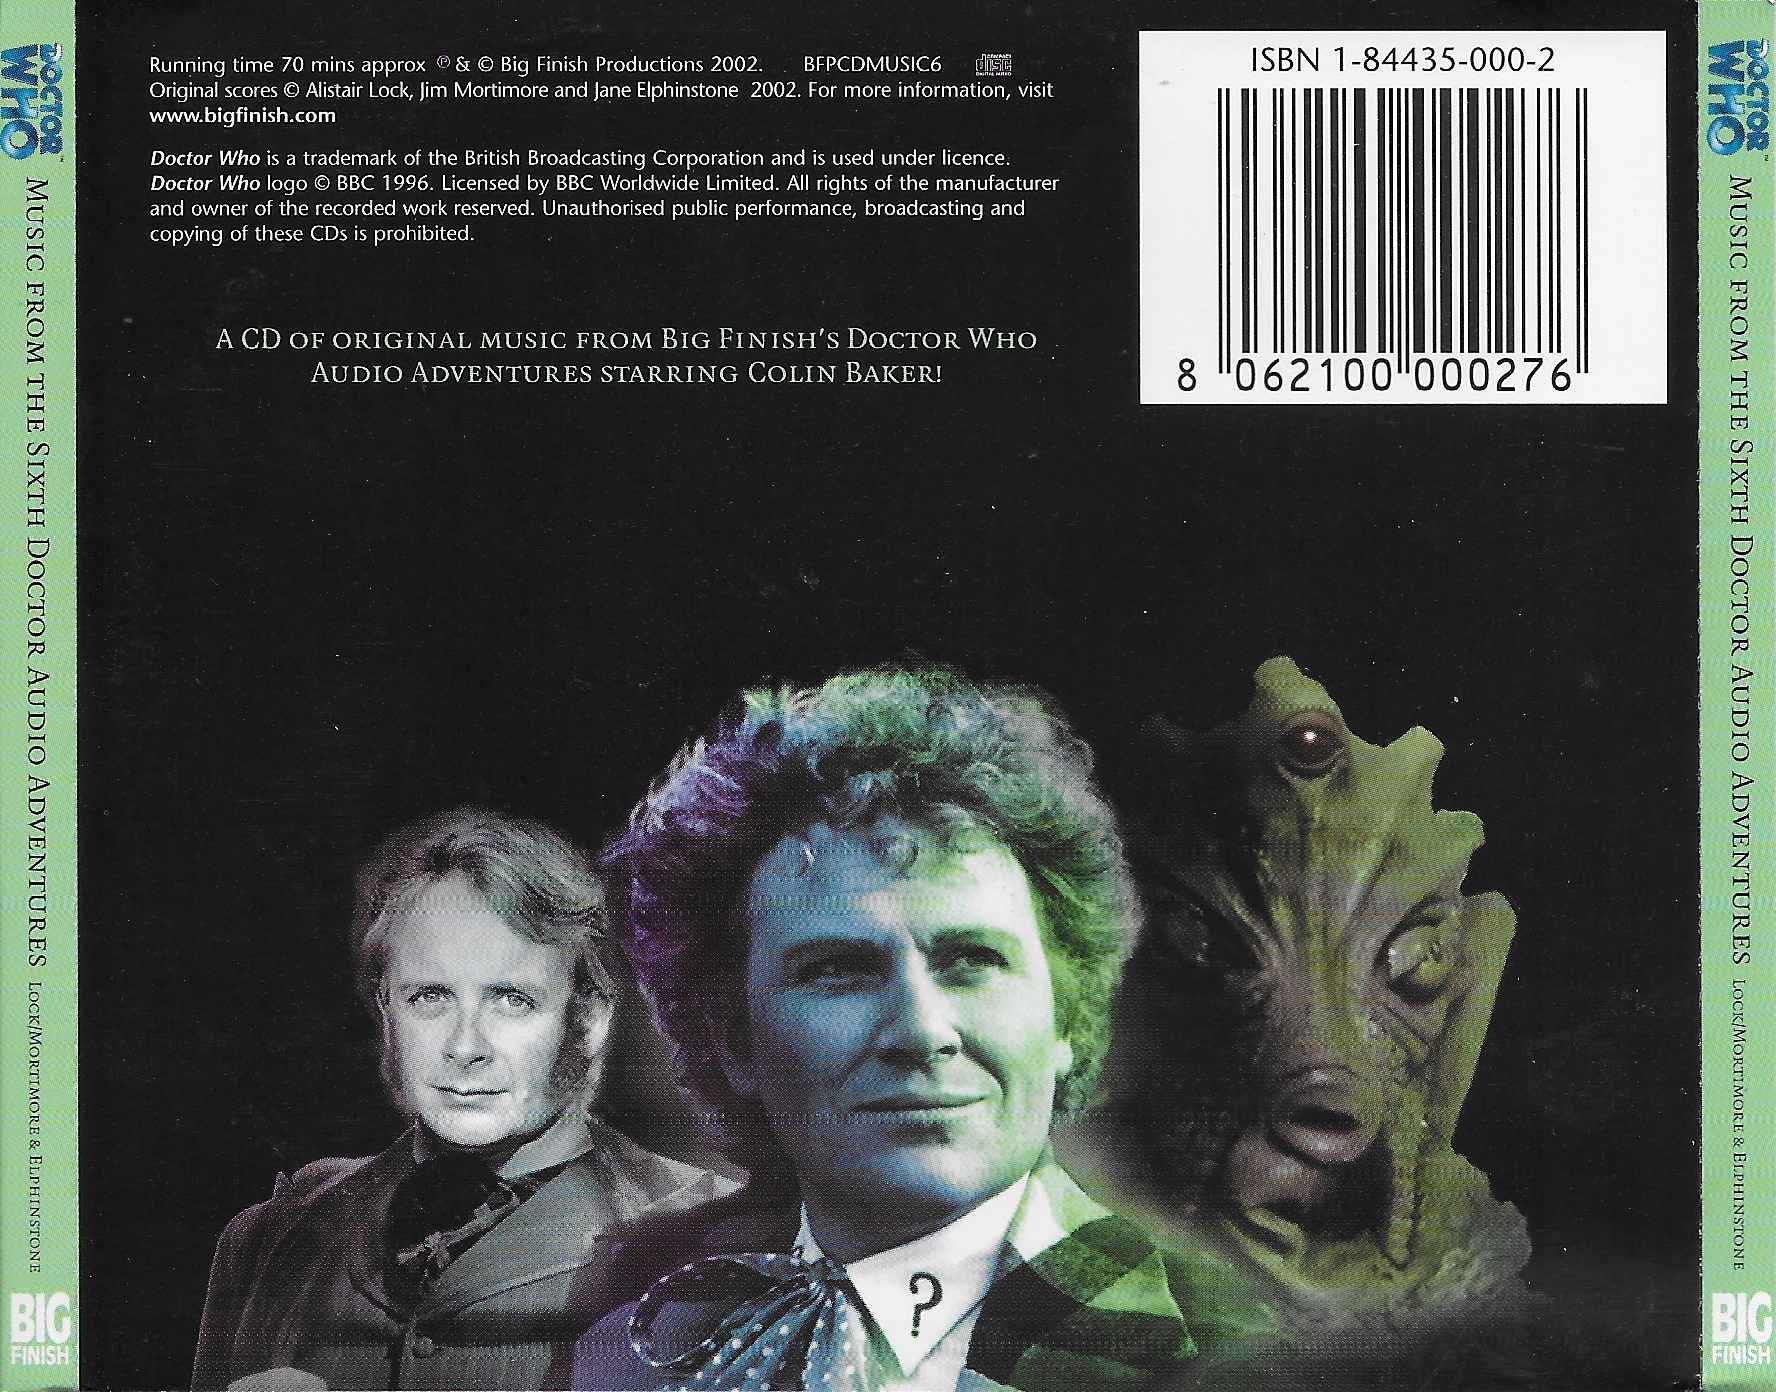 Picture of ISBN 1-84435-000-2 Doctor Who - The sixth Doctor audio adventures by artist Alistair Lock / Jim Mortimore / Jane Elphinstone from the BBC records and Tapes library